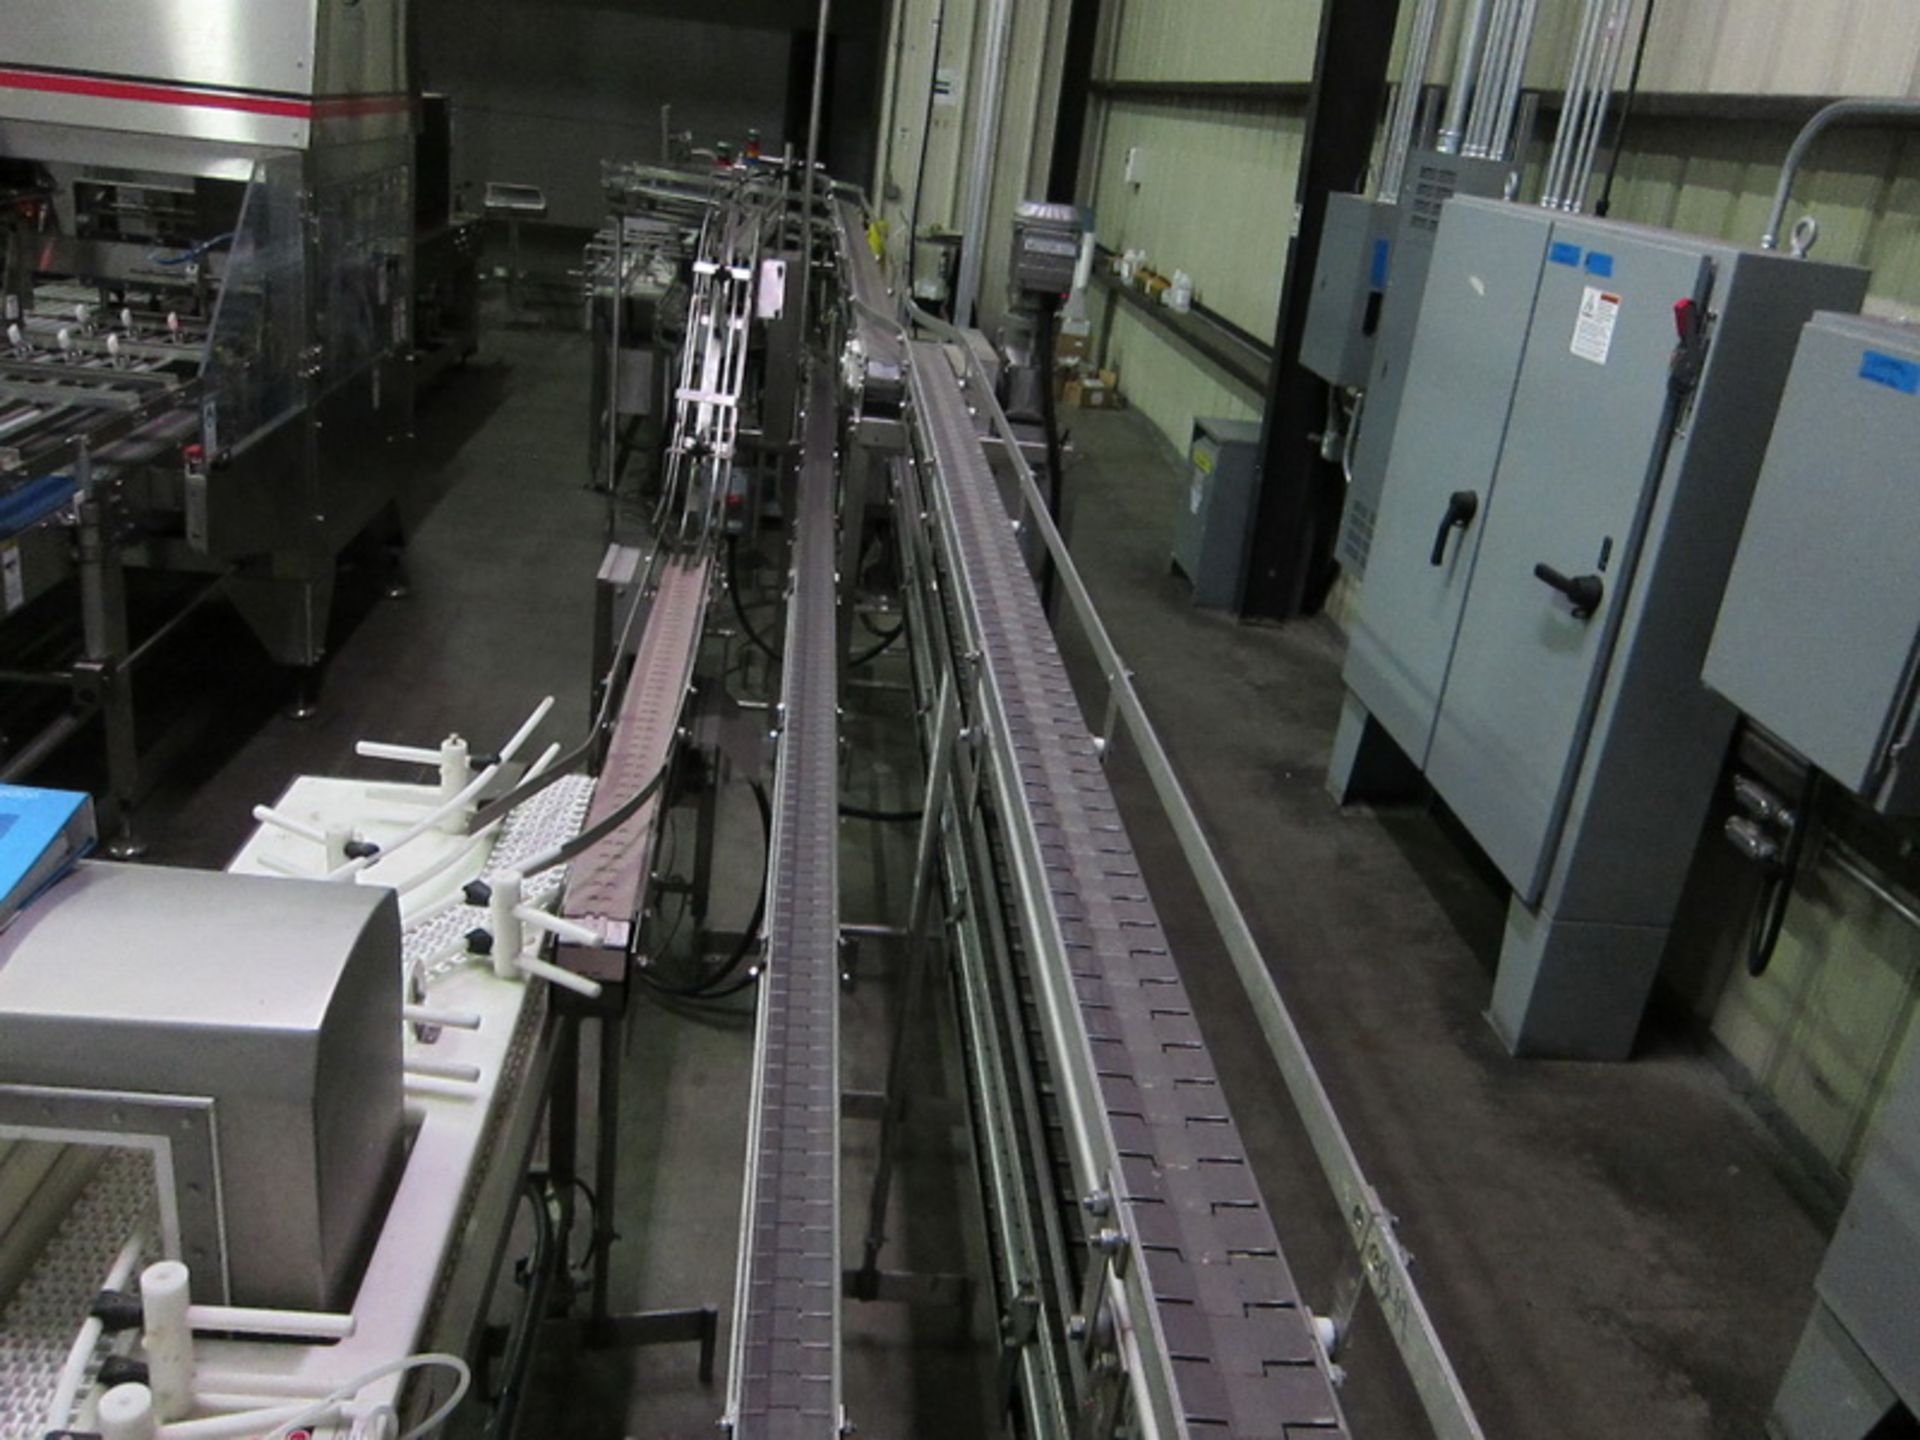 [Lot] Dairy Conveyor Corp. table top conveyors, extending from filling room to checkweigh in tray - Image 4 of 8